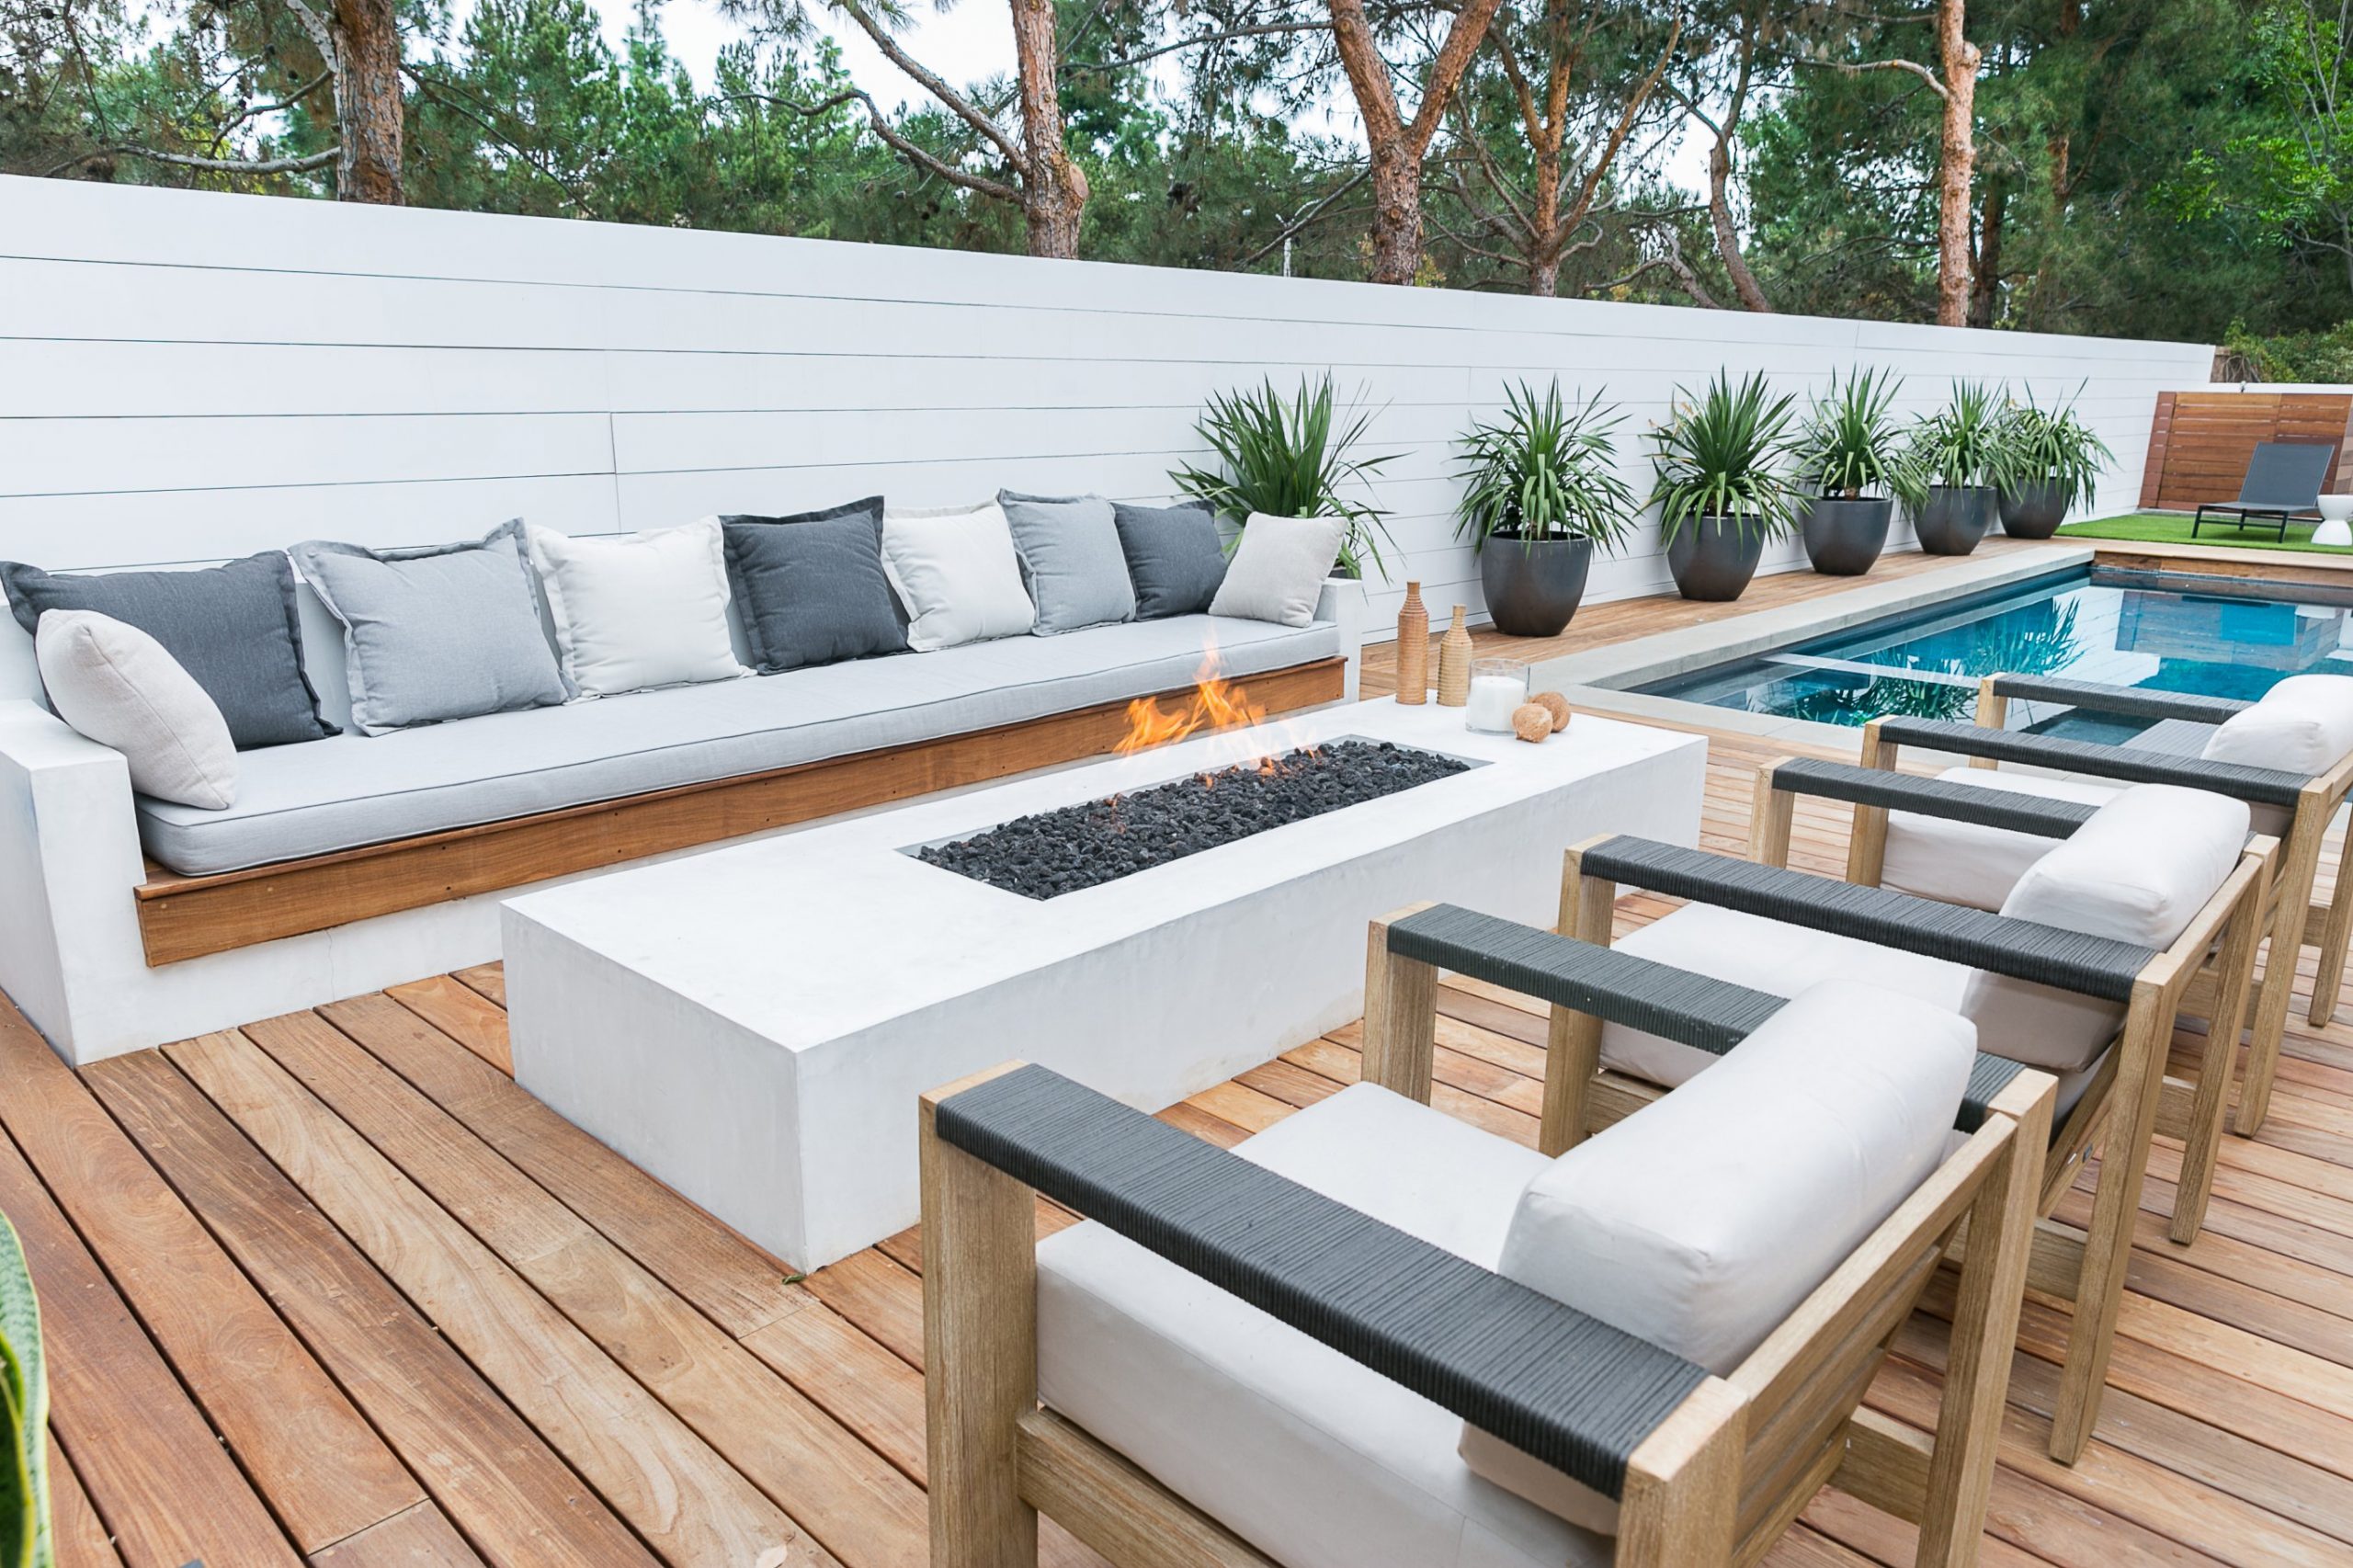 The 7 Hottest Trends in Deck Design to Inspire Your Next Project